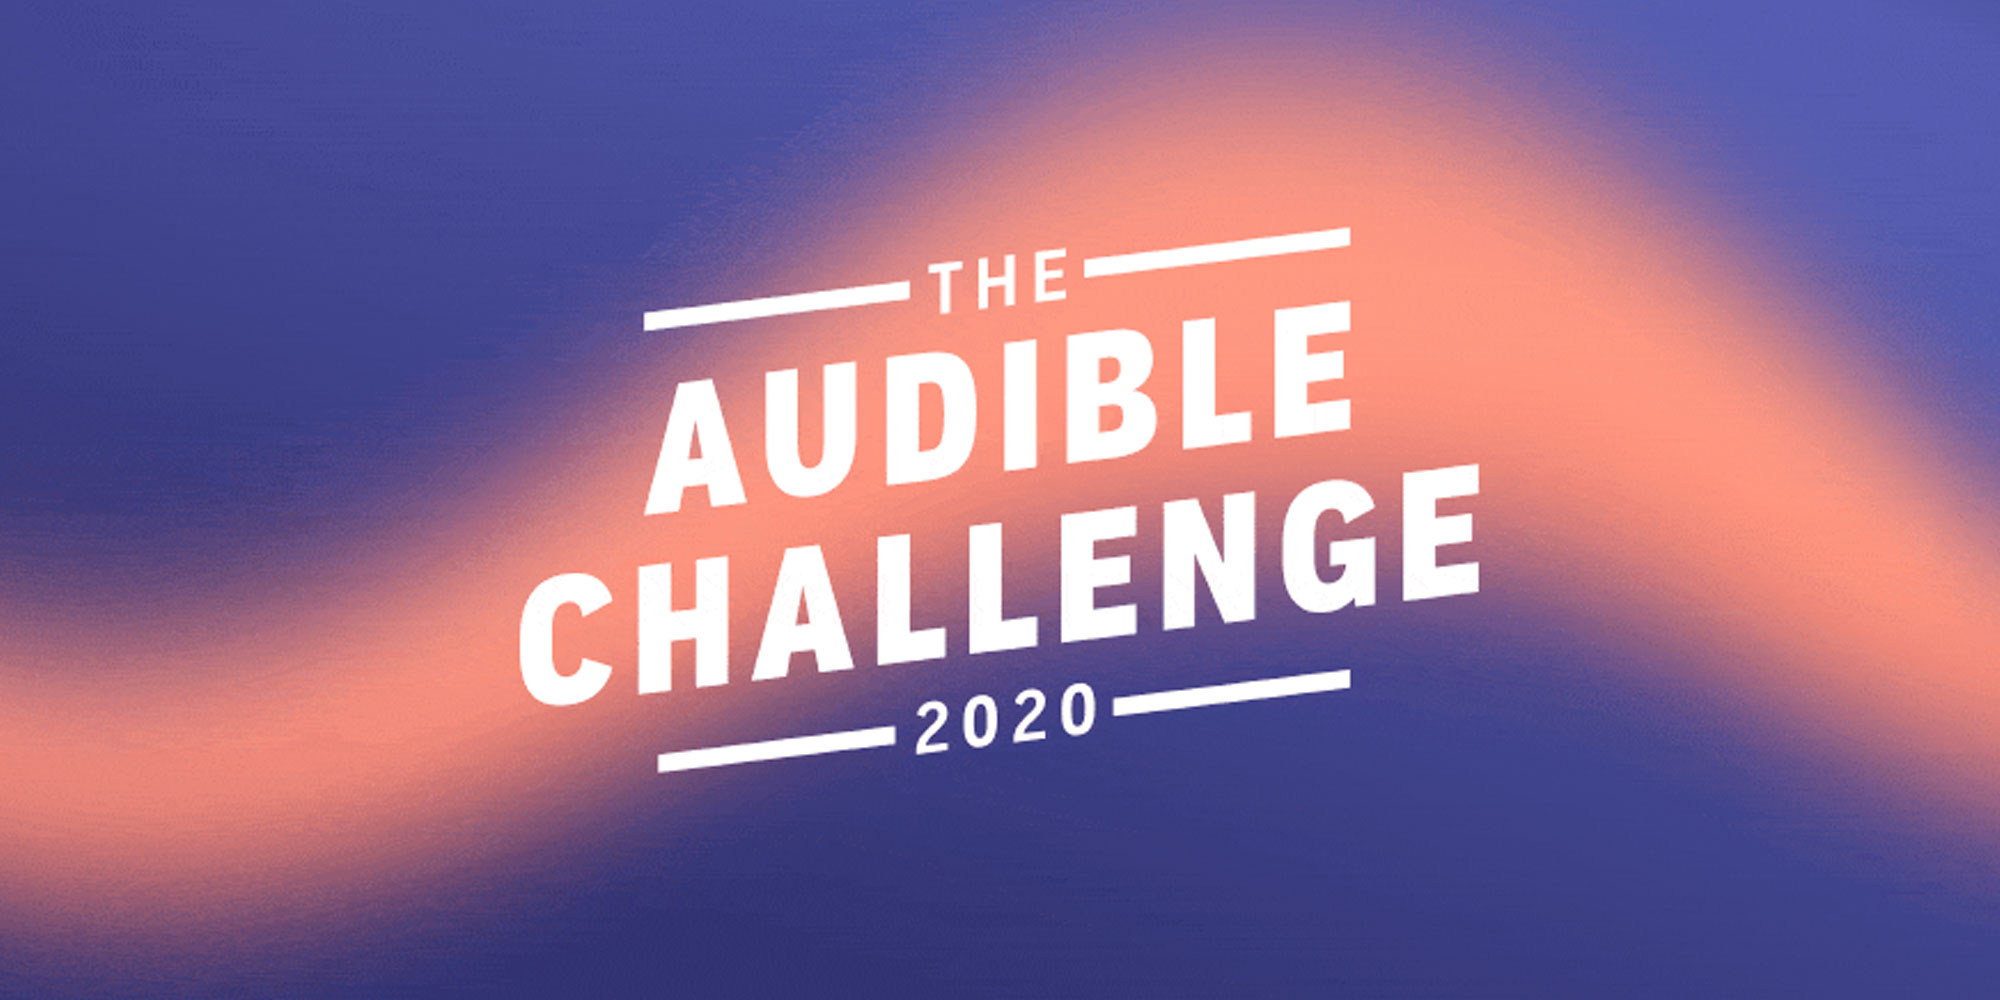 Audible Challenge 2020 delivers a 20 Amazon credit for finishing three